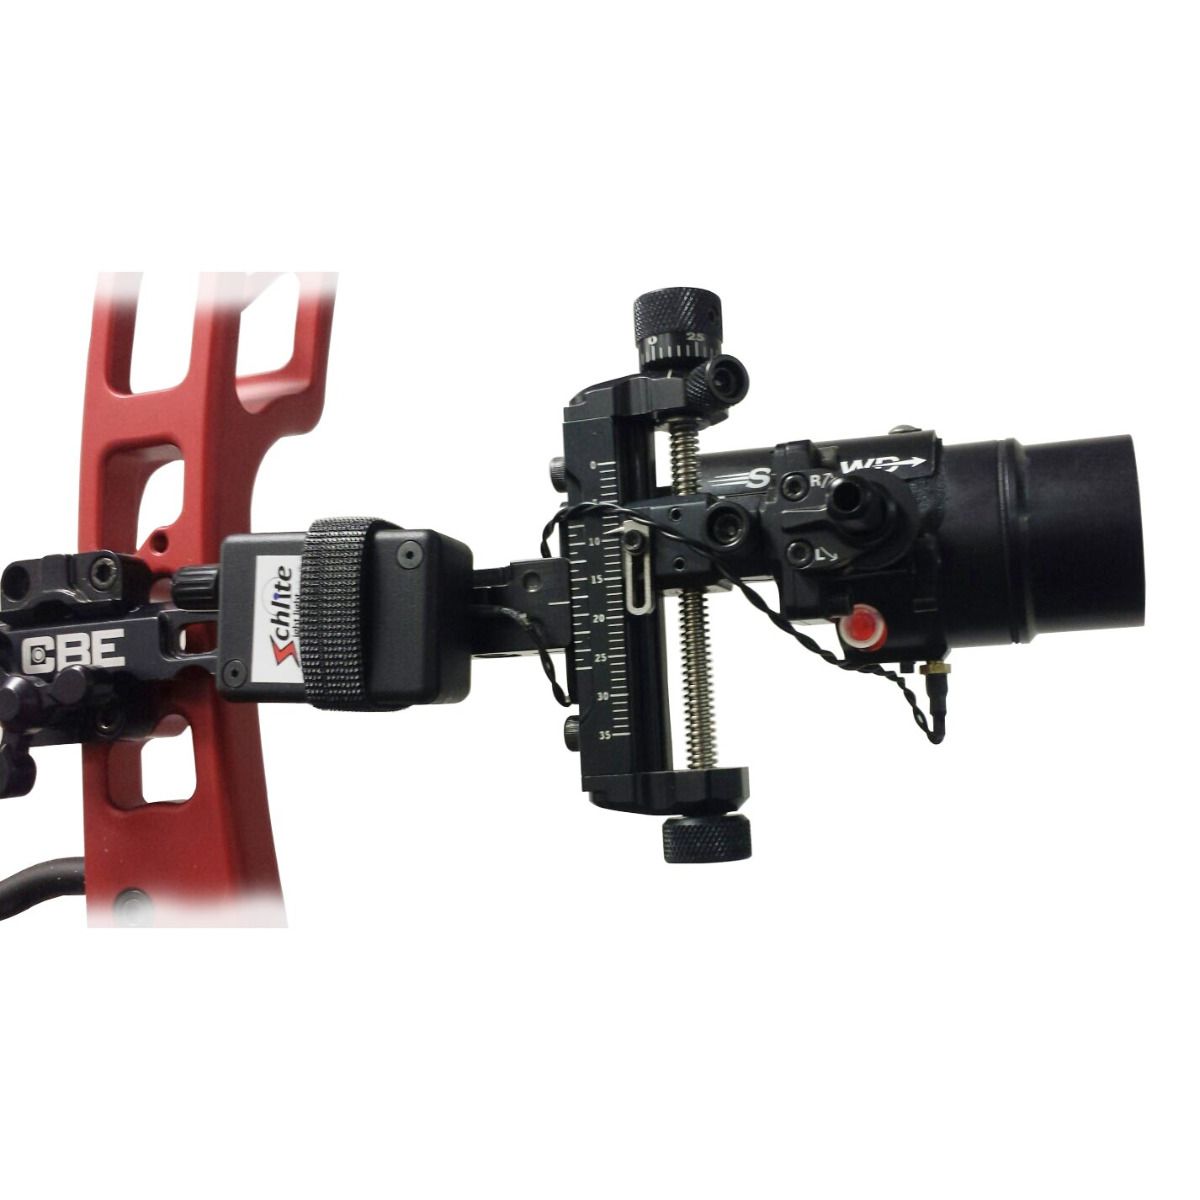 NEW SCHLITE ARCHERY SIGHT LIGHT FOR TARGET AND BOWHUNTING BOW HUNTING 